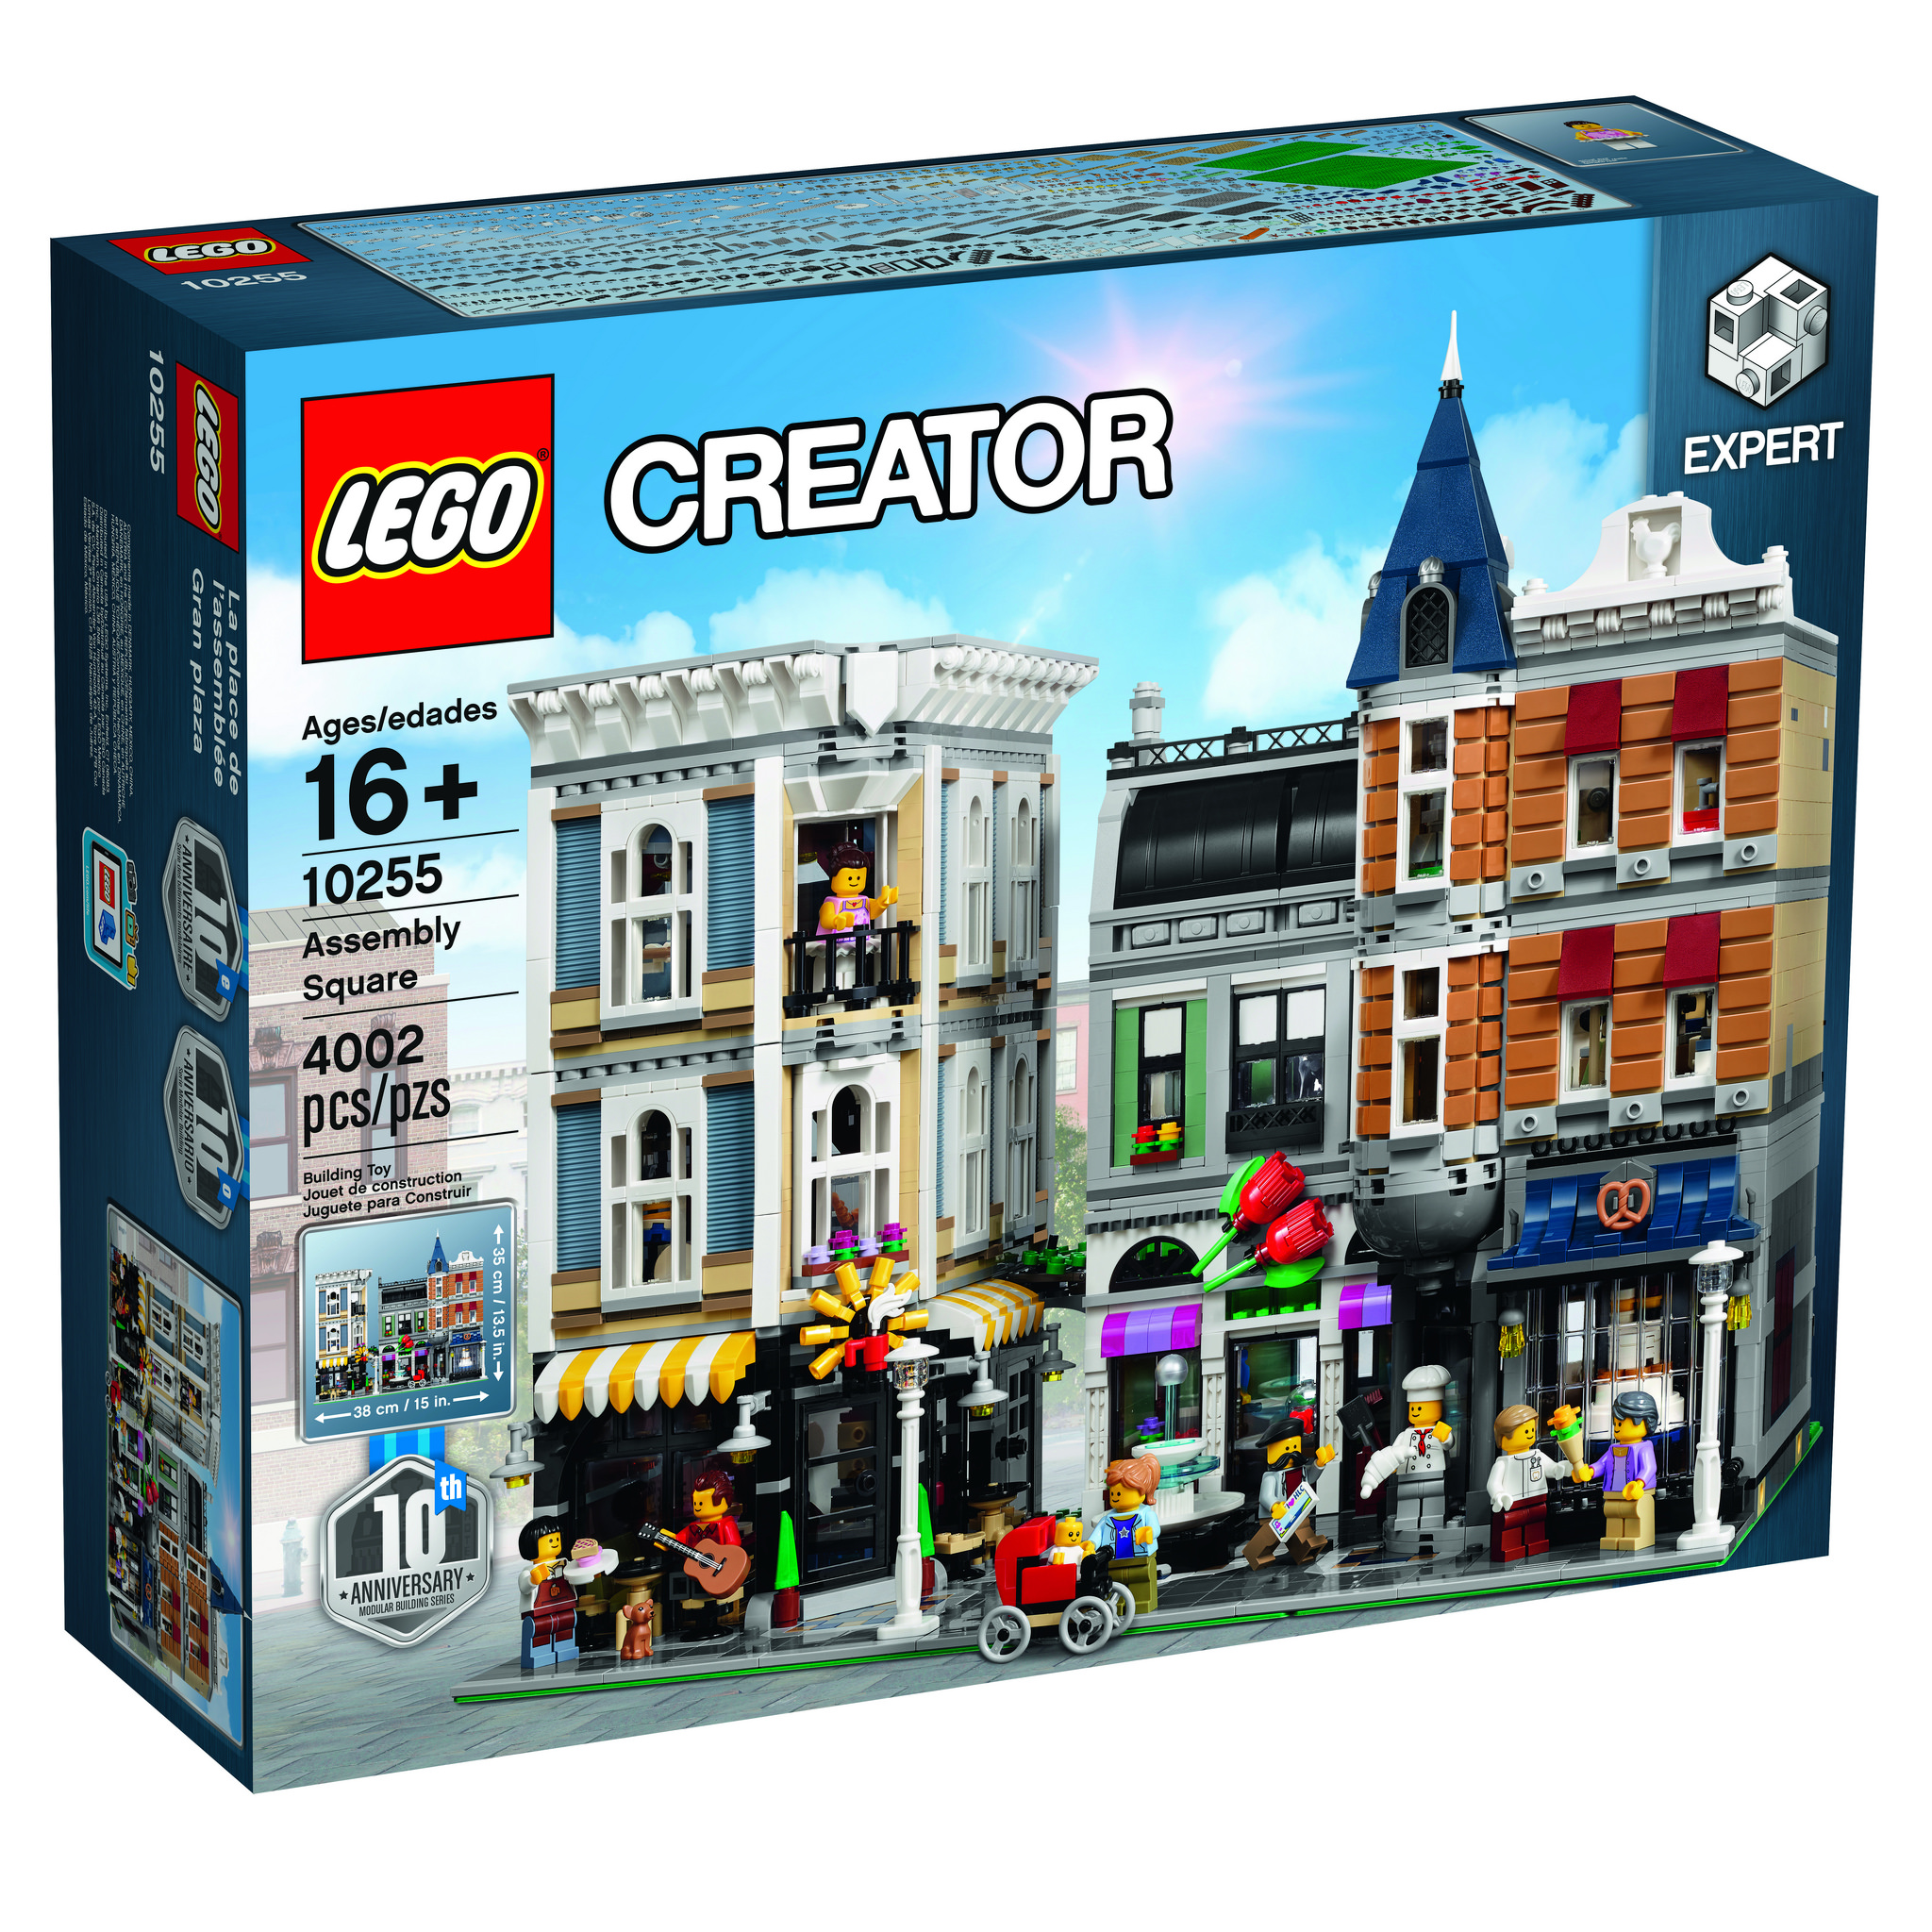 LEGO Creator Expert Assembly Square 10255 l'annonce officielle